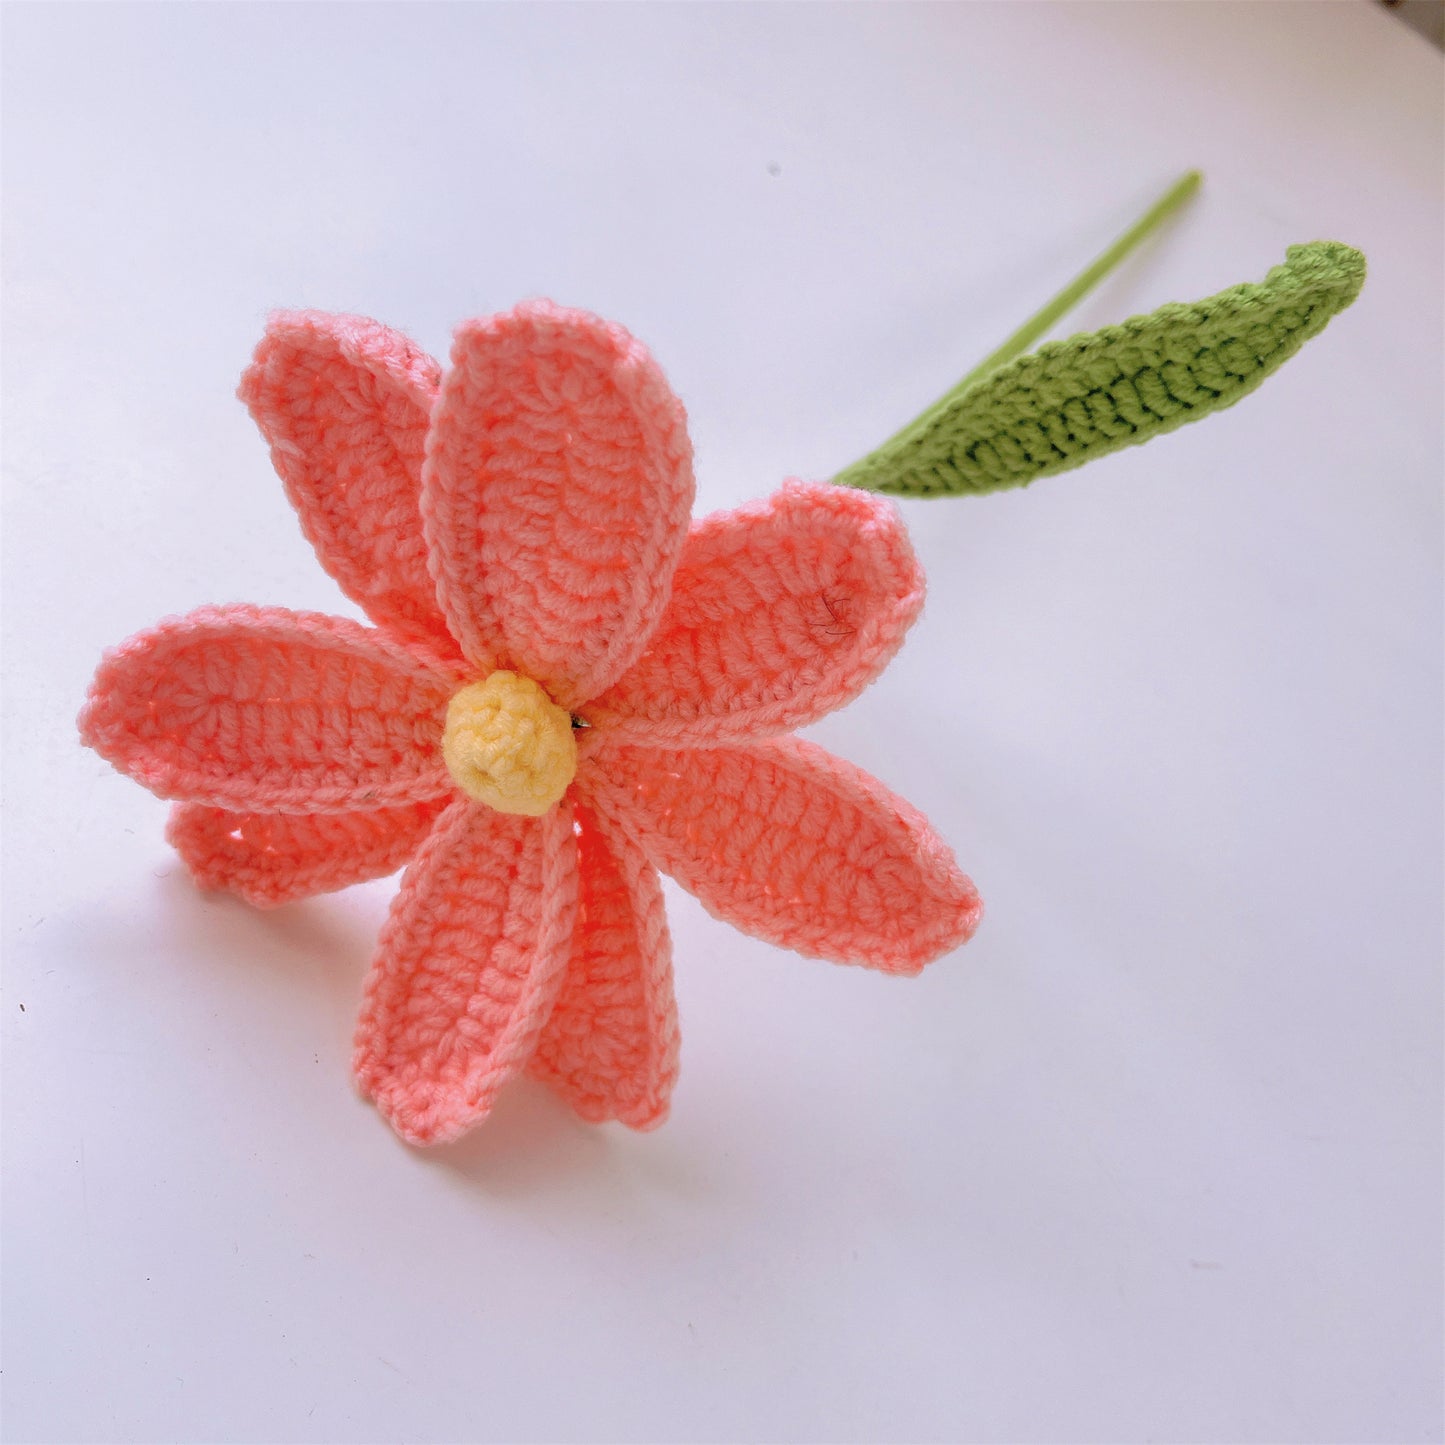 Handmade Crochet Cosmos Bipinnatus - Yarn Crafted, Home Decor, Gift Idea, Delicate and Charming, Symbolic Flower, Fall Decoration for Home